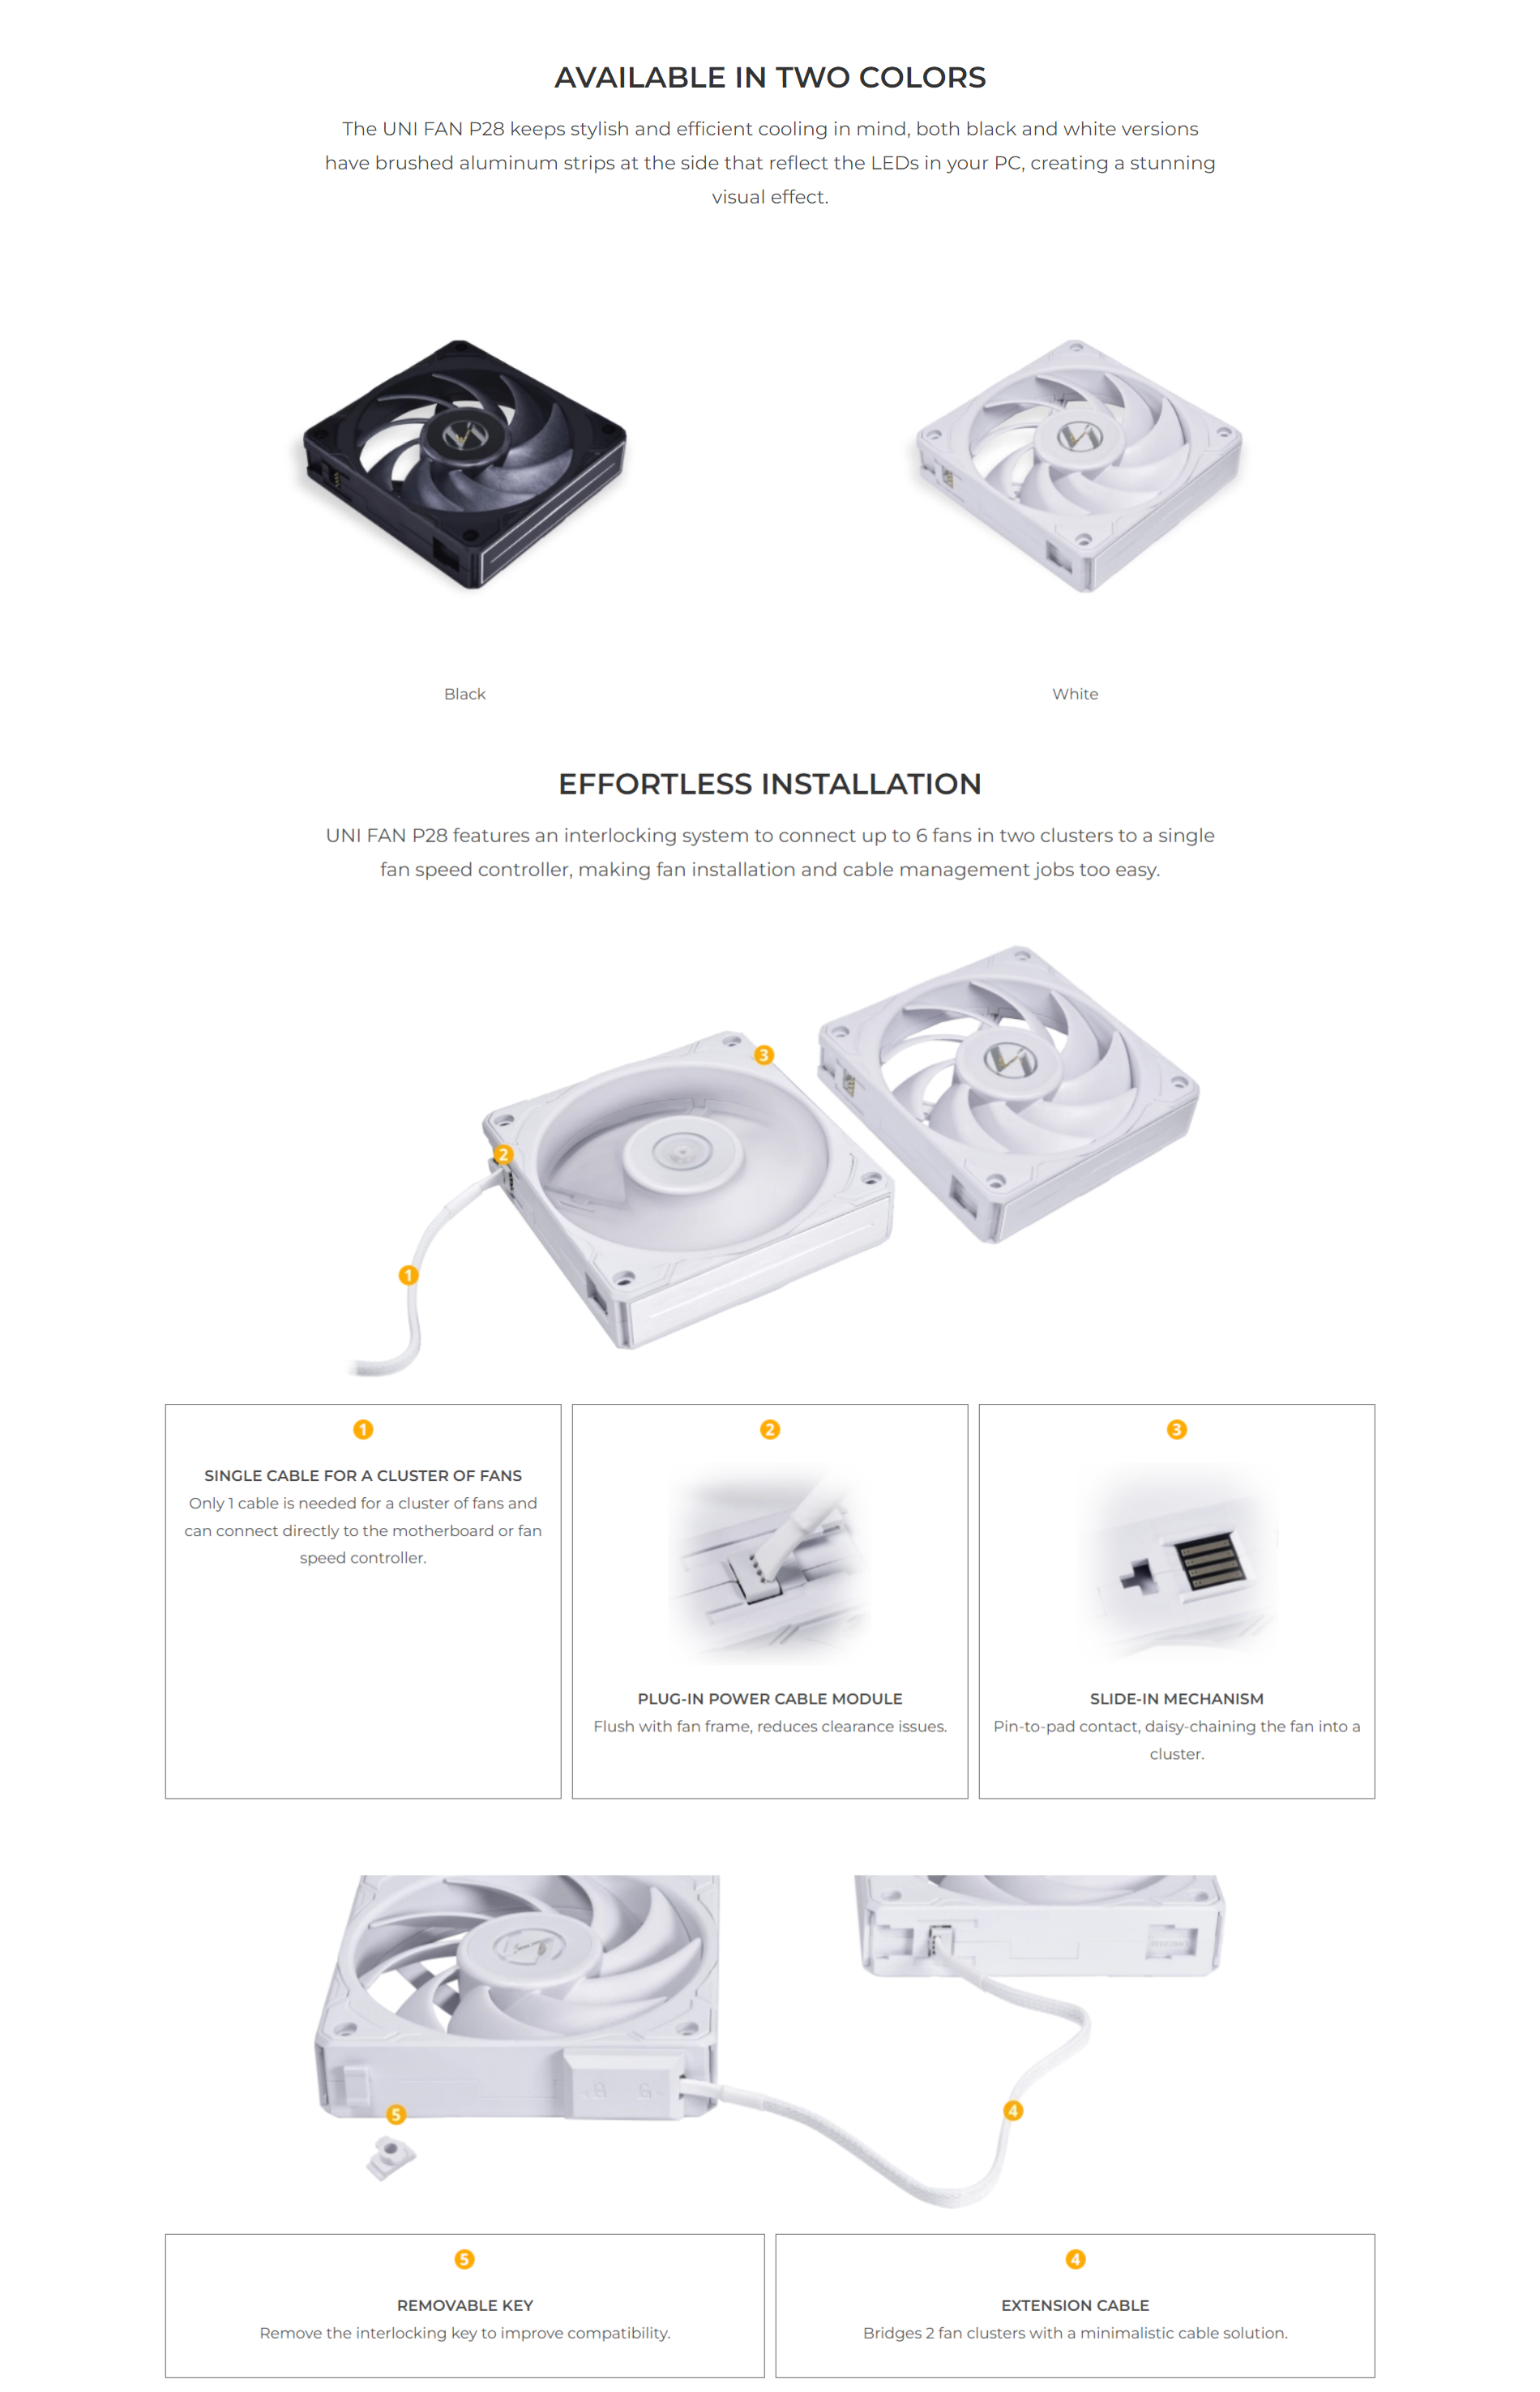 A large marketing image providing additional information about the product Lian Li UNI P28 120mm Fan Single Pack - White - Additional alt info not provided